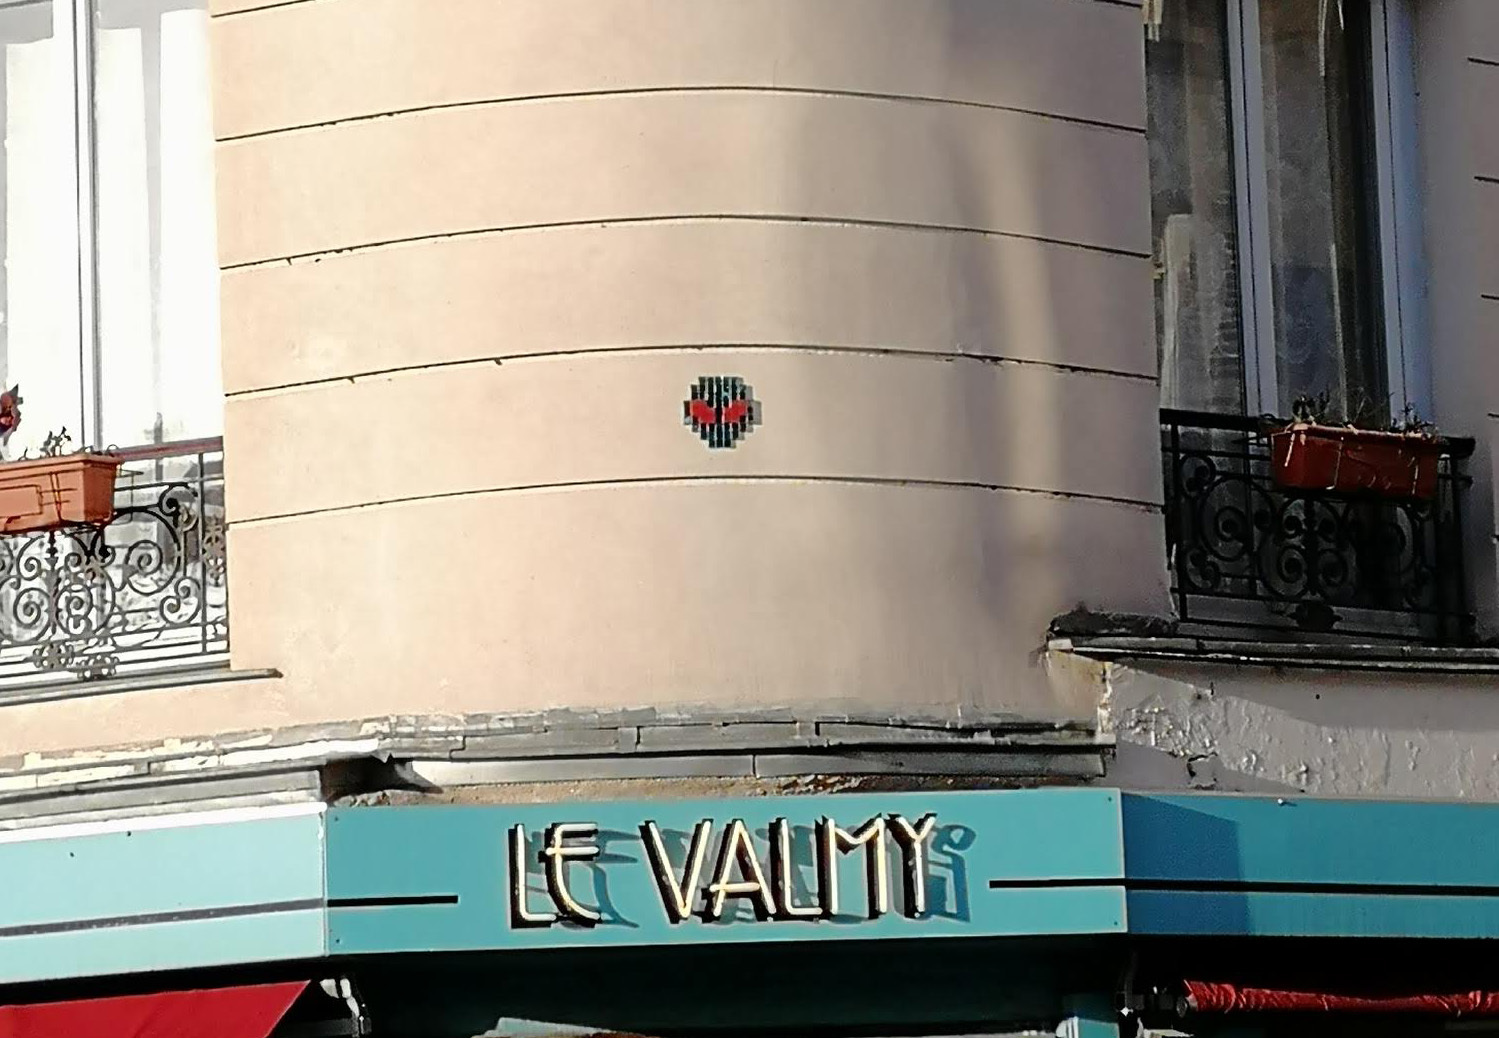 Mosaic 668  by the artist Invader captured by Rabot in Paris France